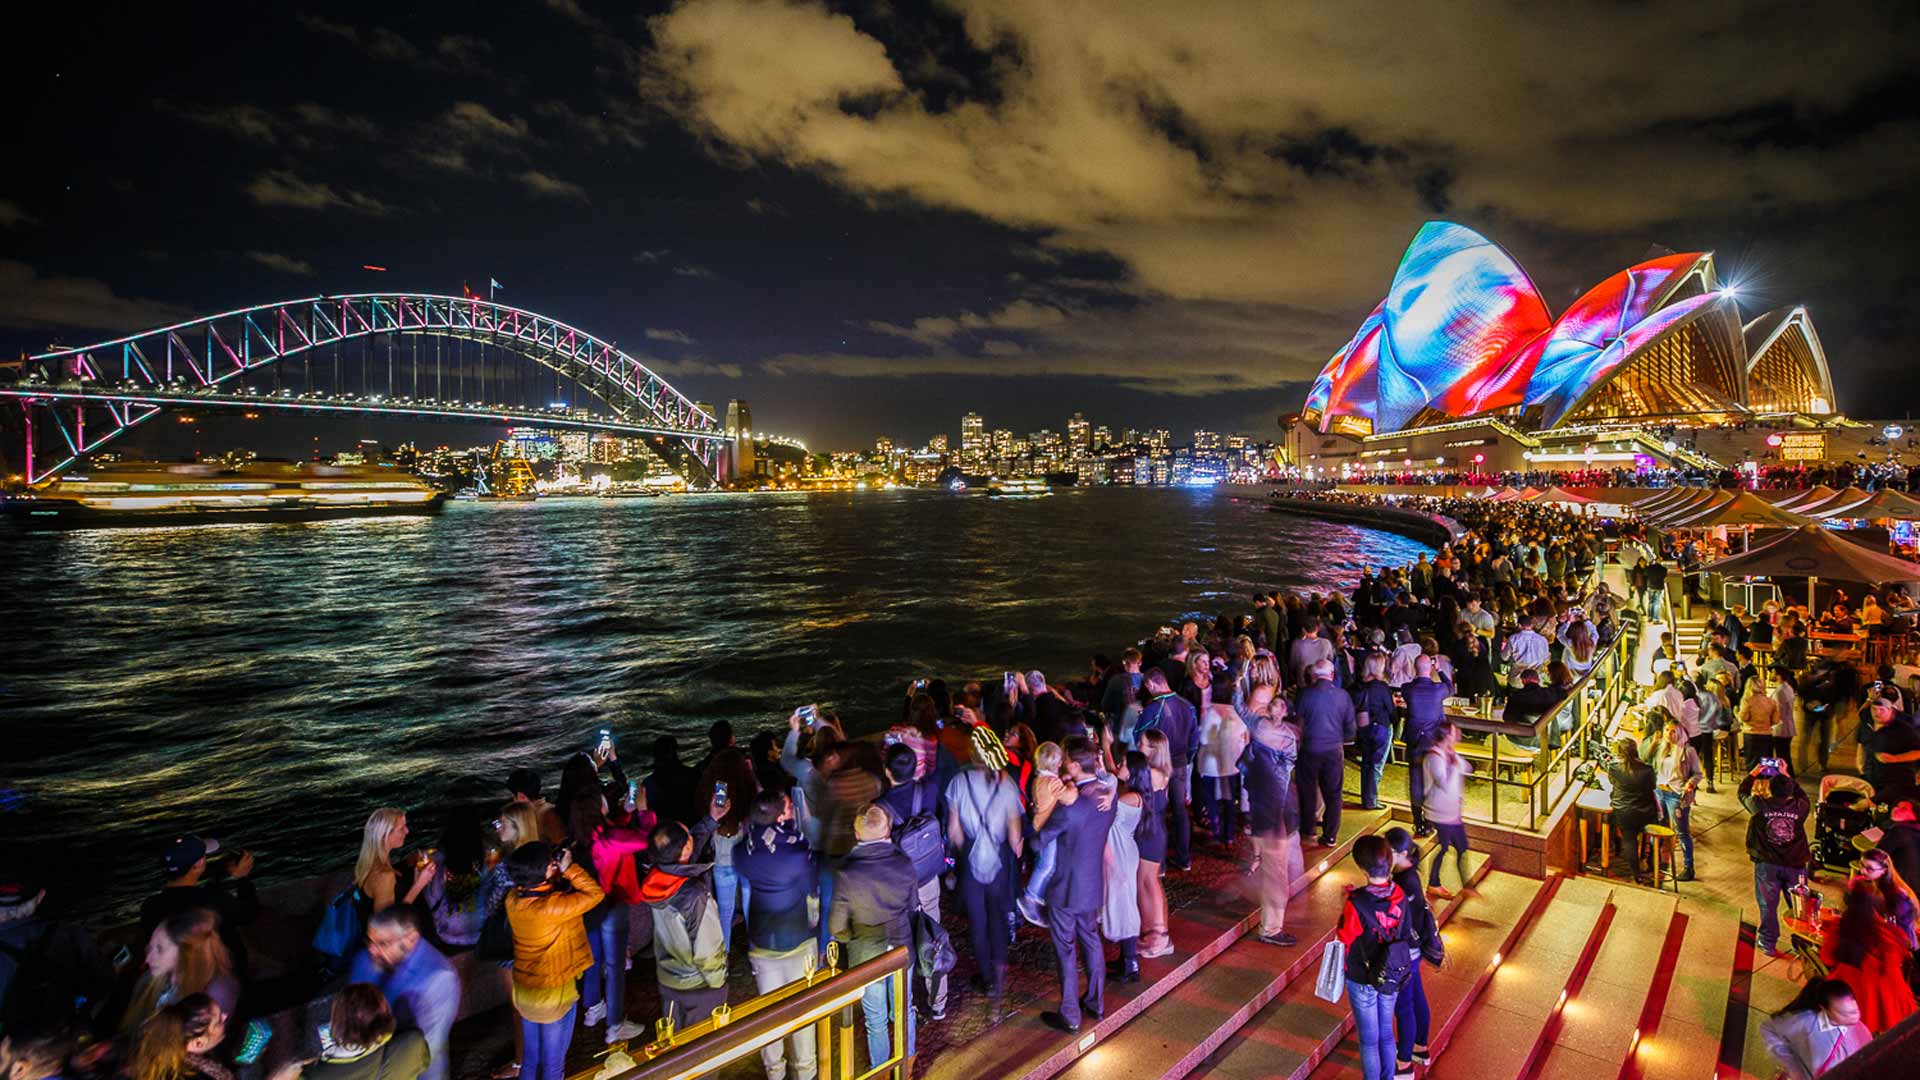 Vivid Will Bring Its Luminous Installations and Live Performances Back to Sydney in August 2021